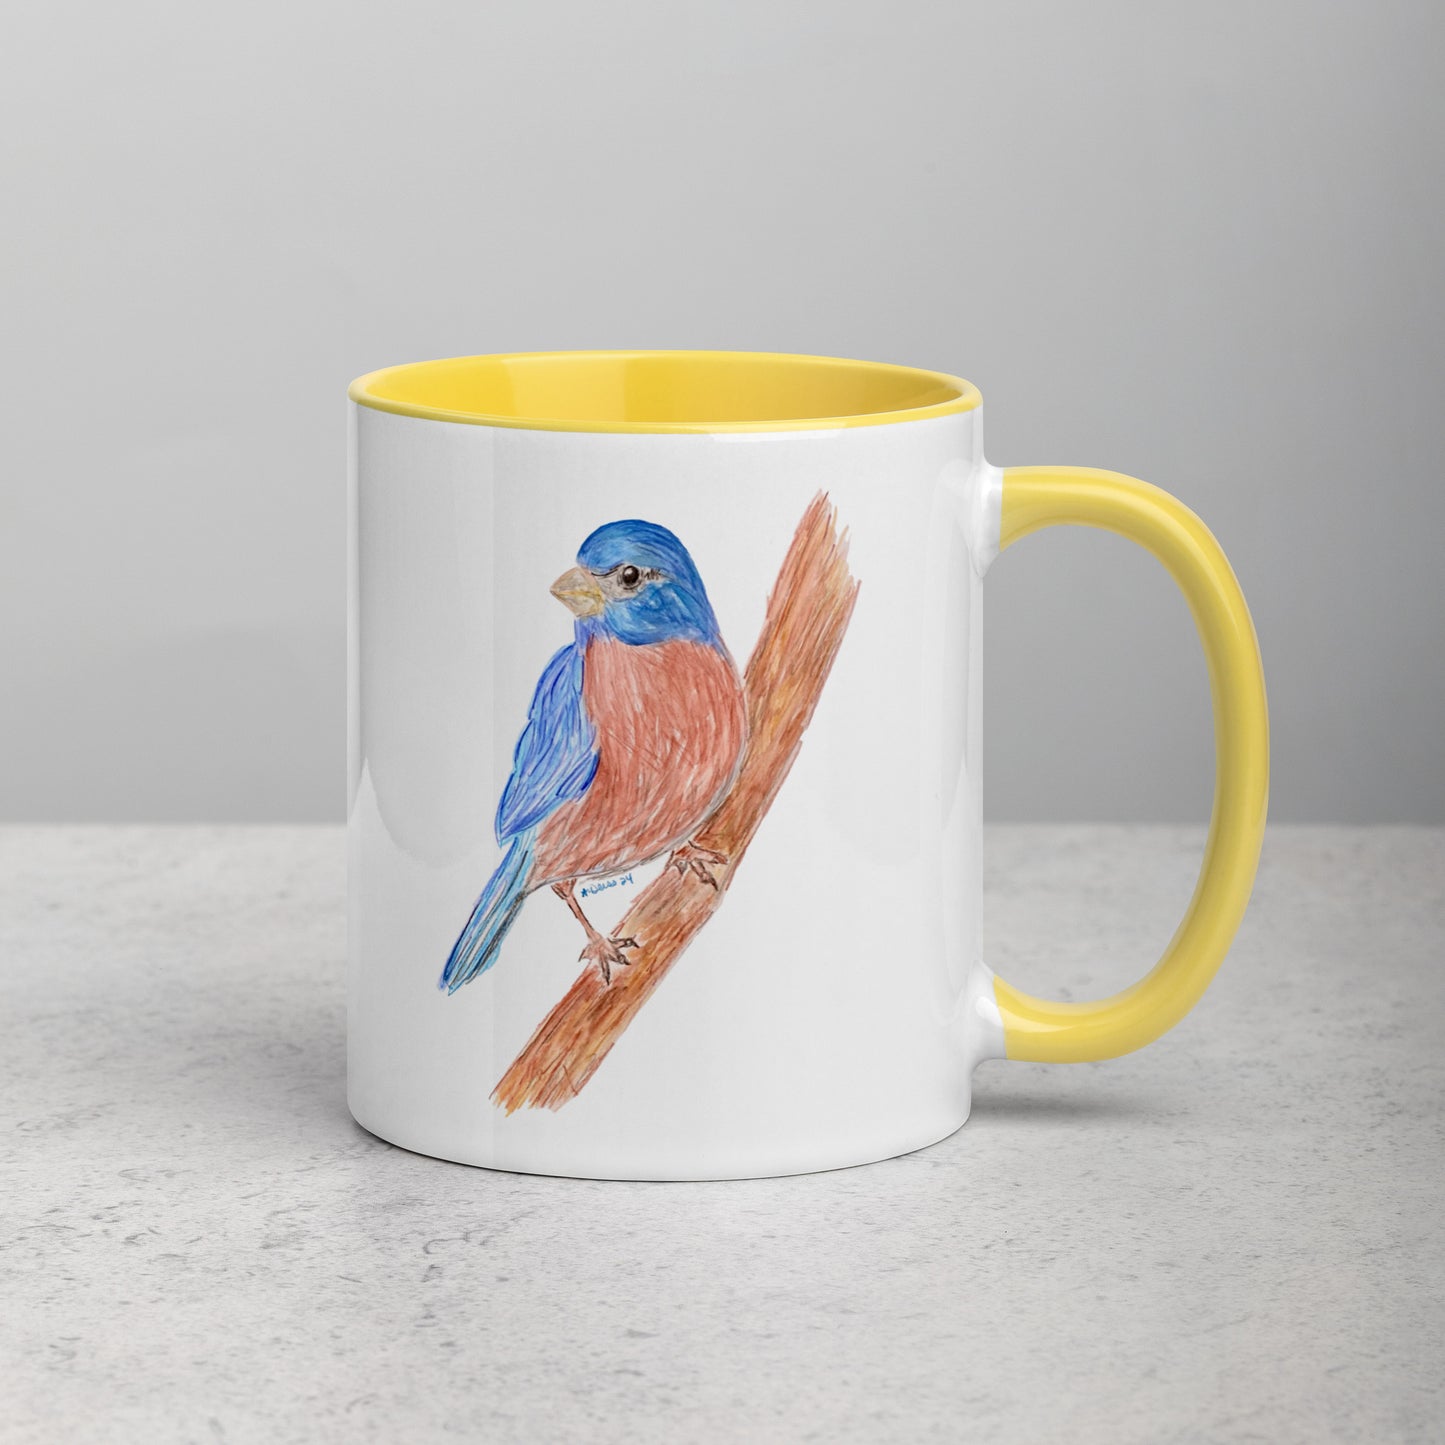 Blue Jay Mug Two Tone Color Inside (multiple colors available)